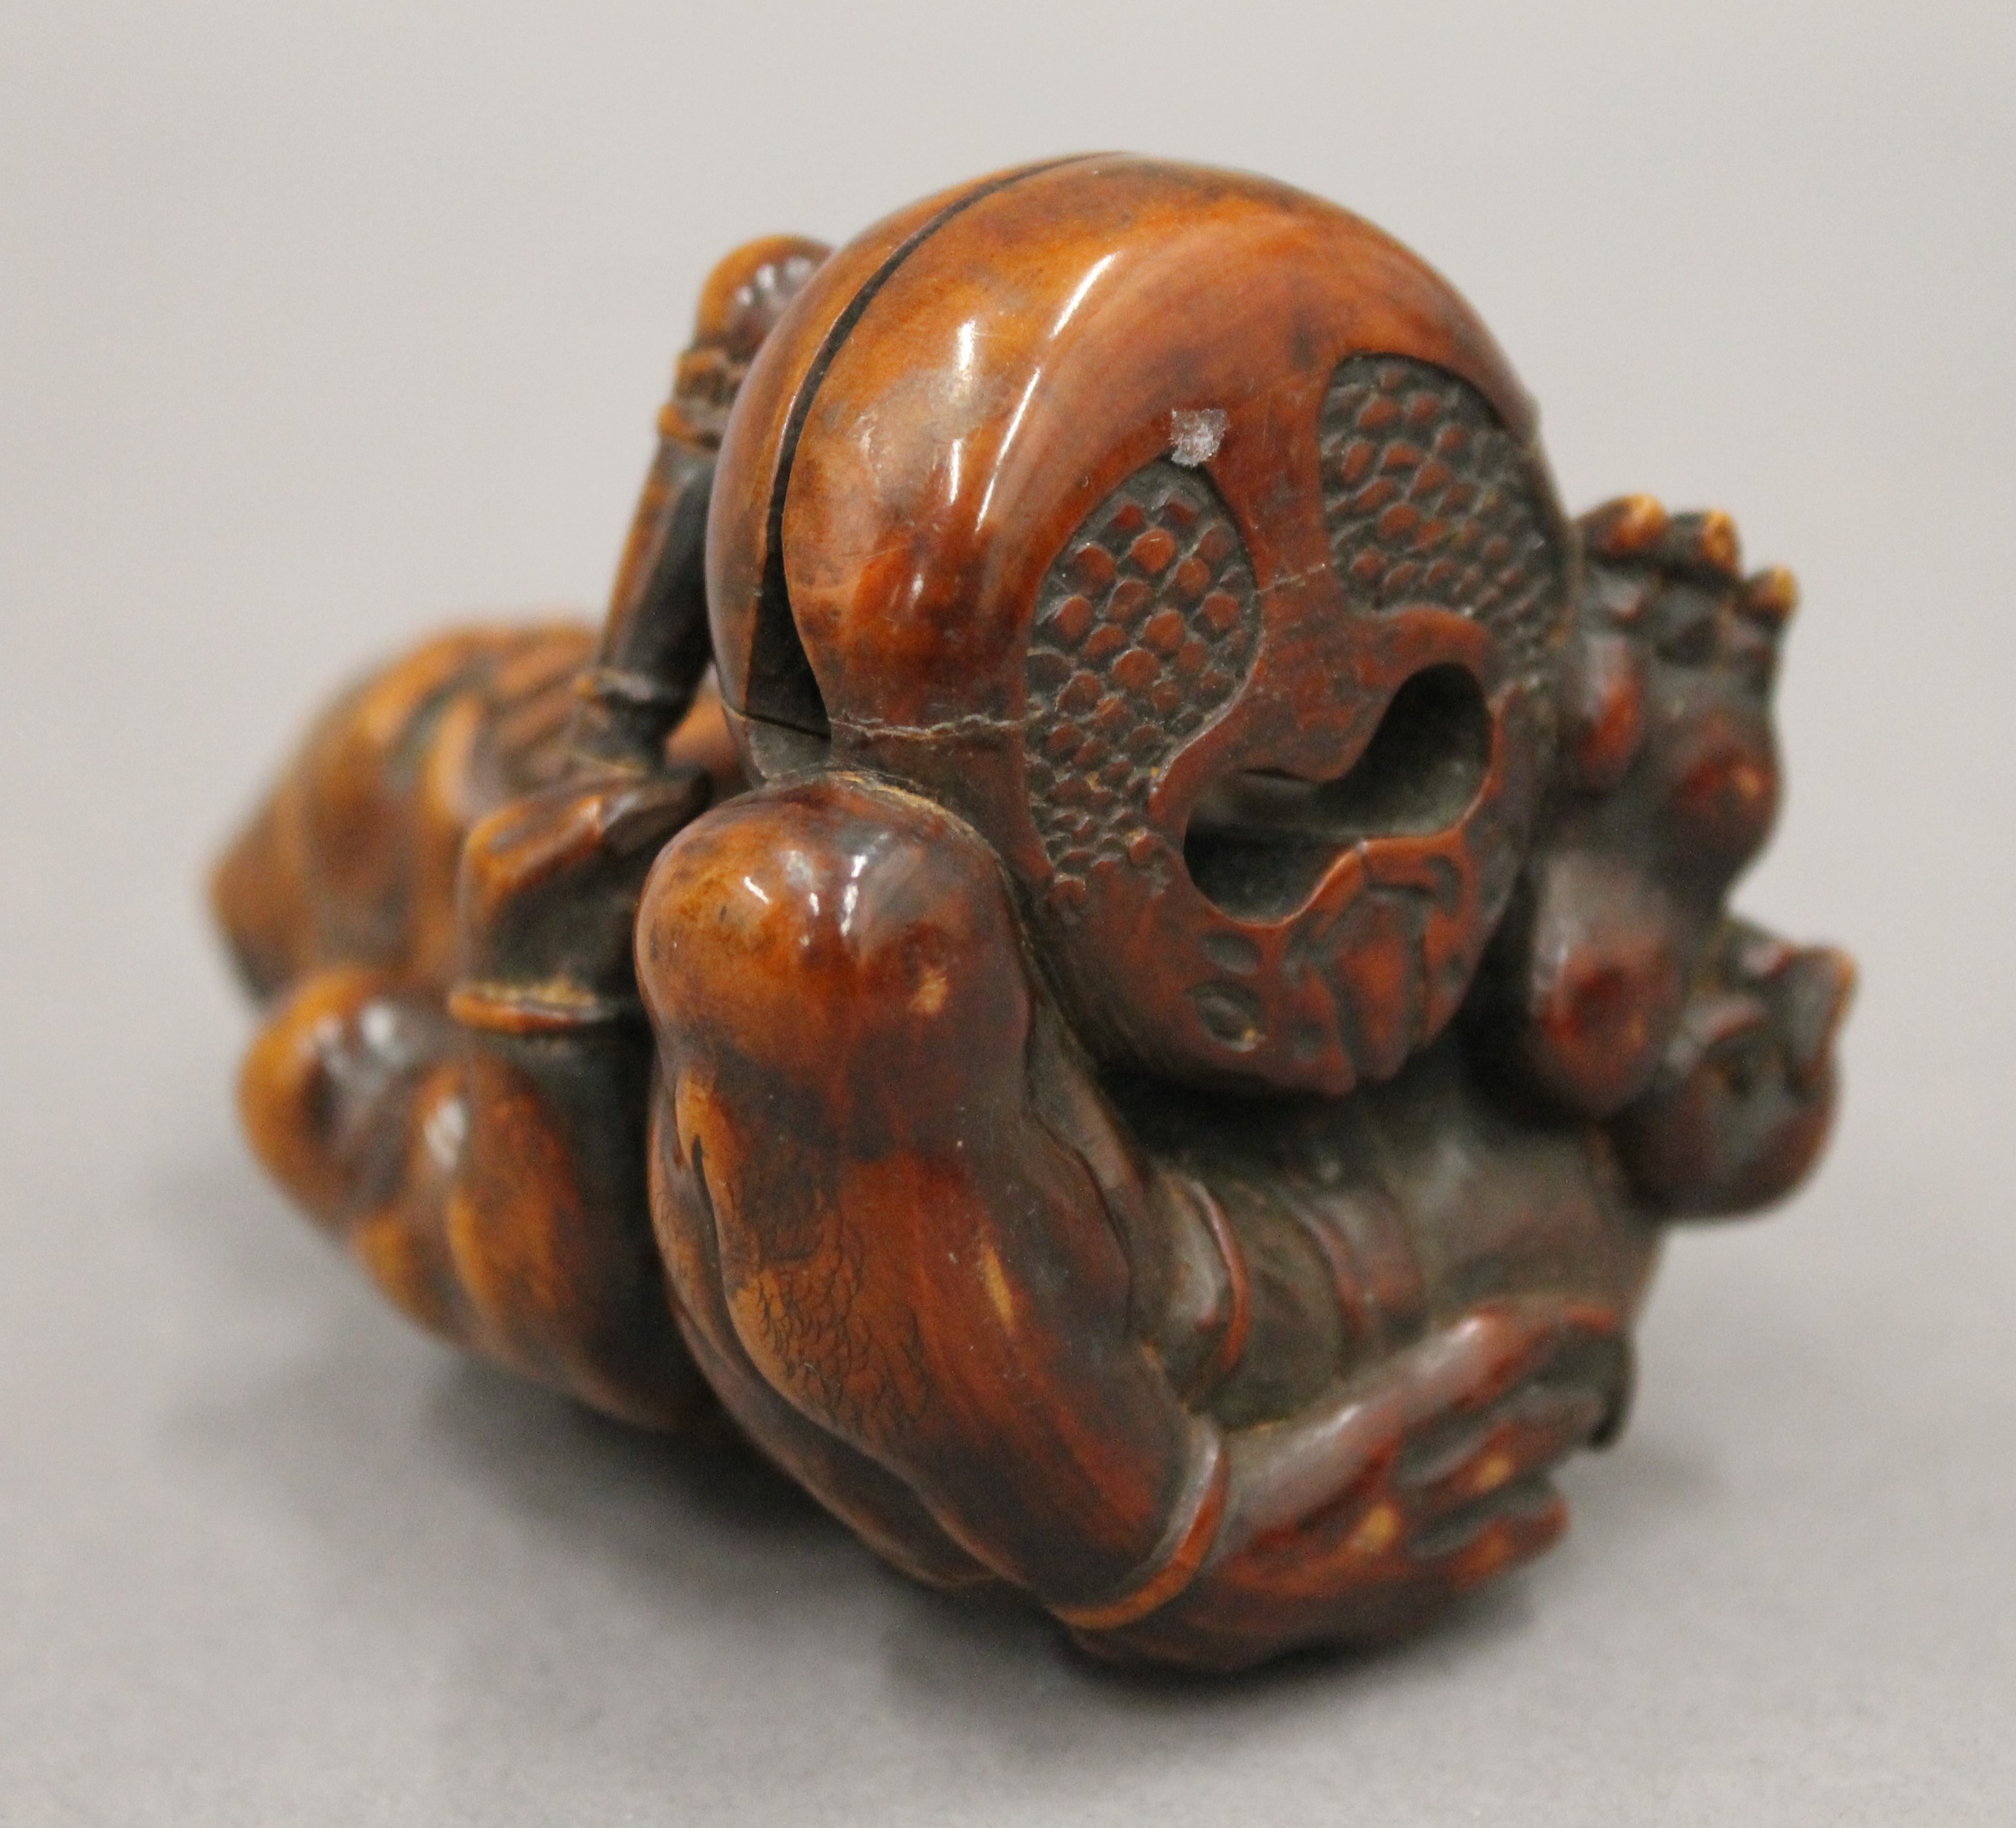 A boxwood okimono formed as a figure banging a drum. 7.5 cm high. - Image 5 of 5